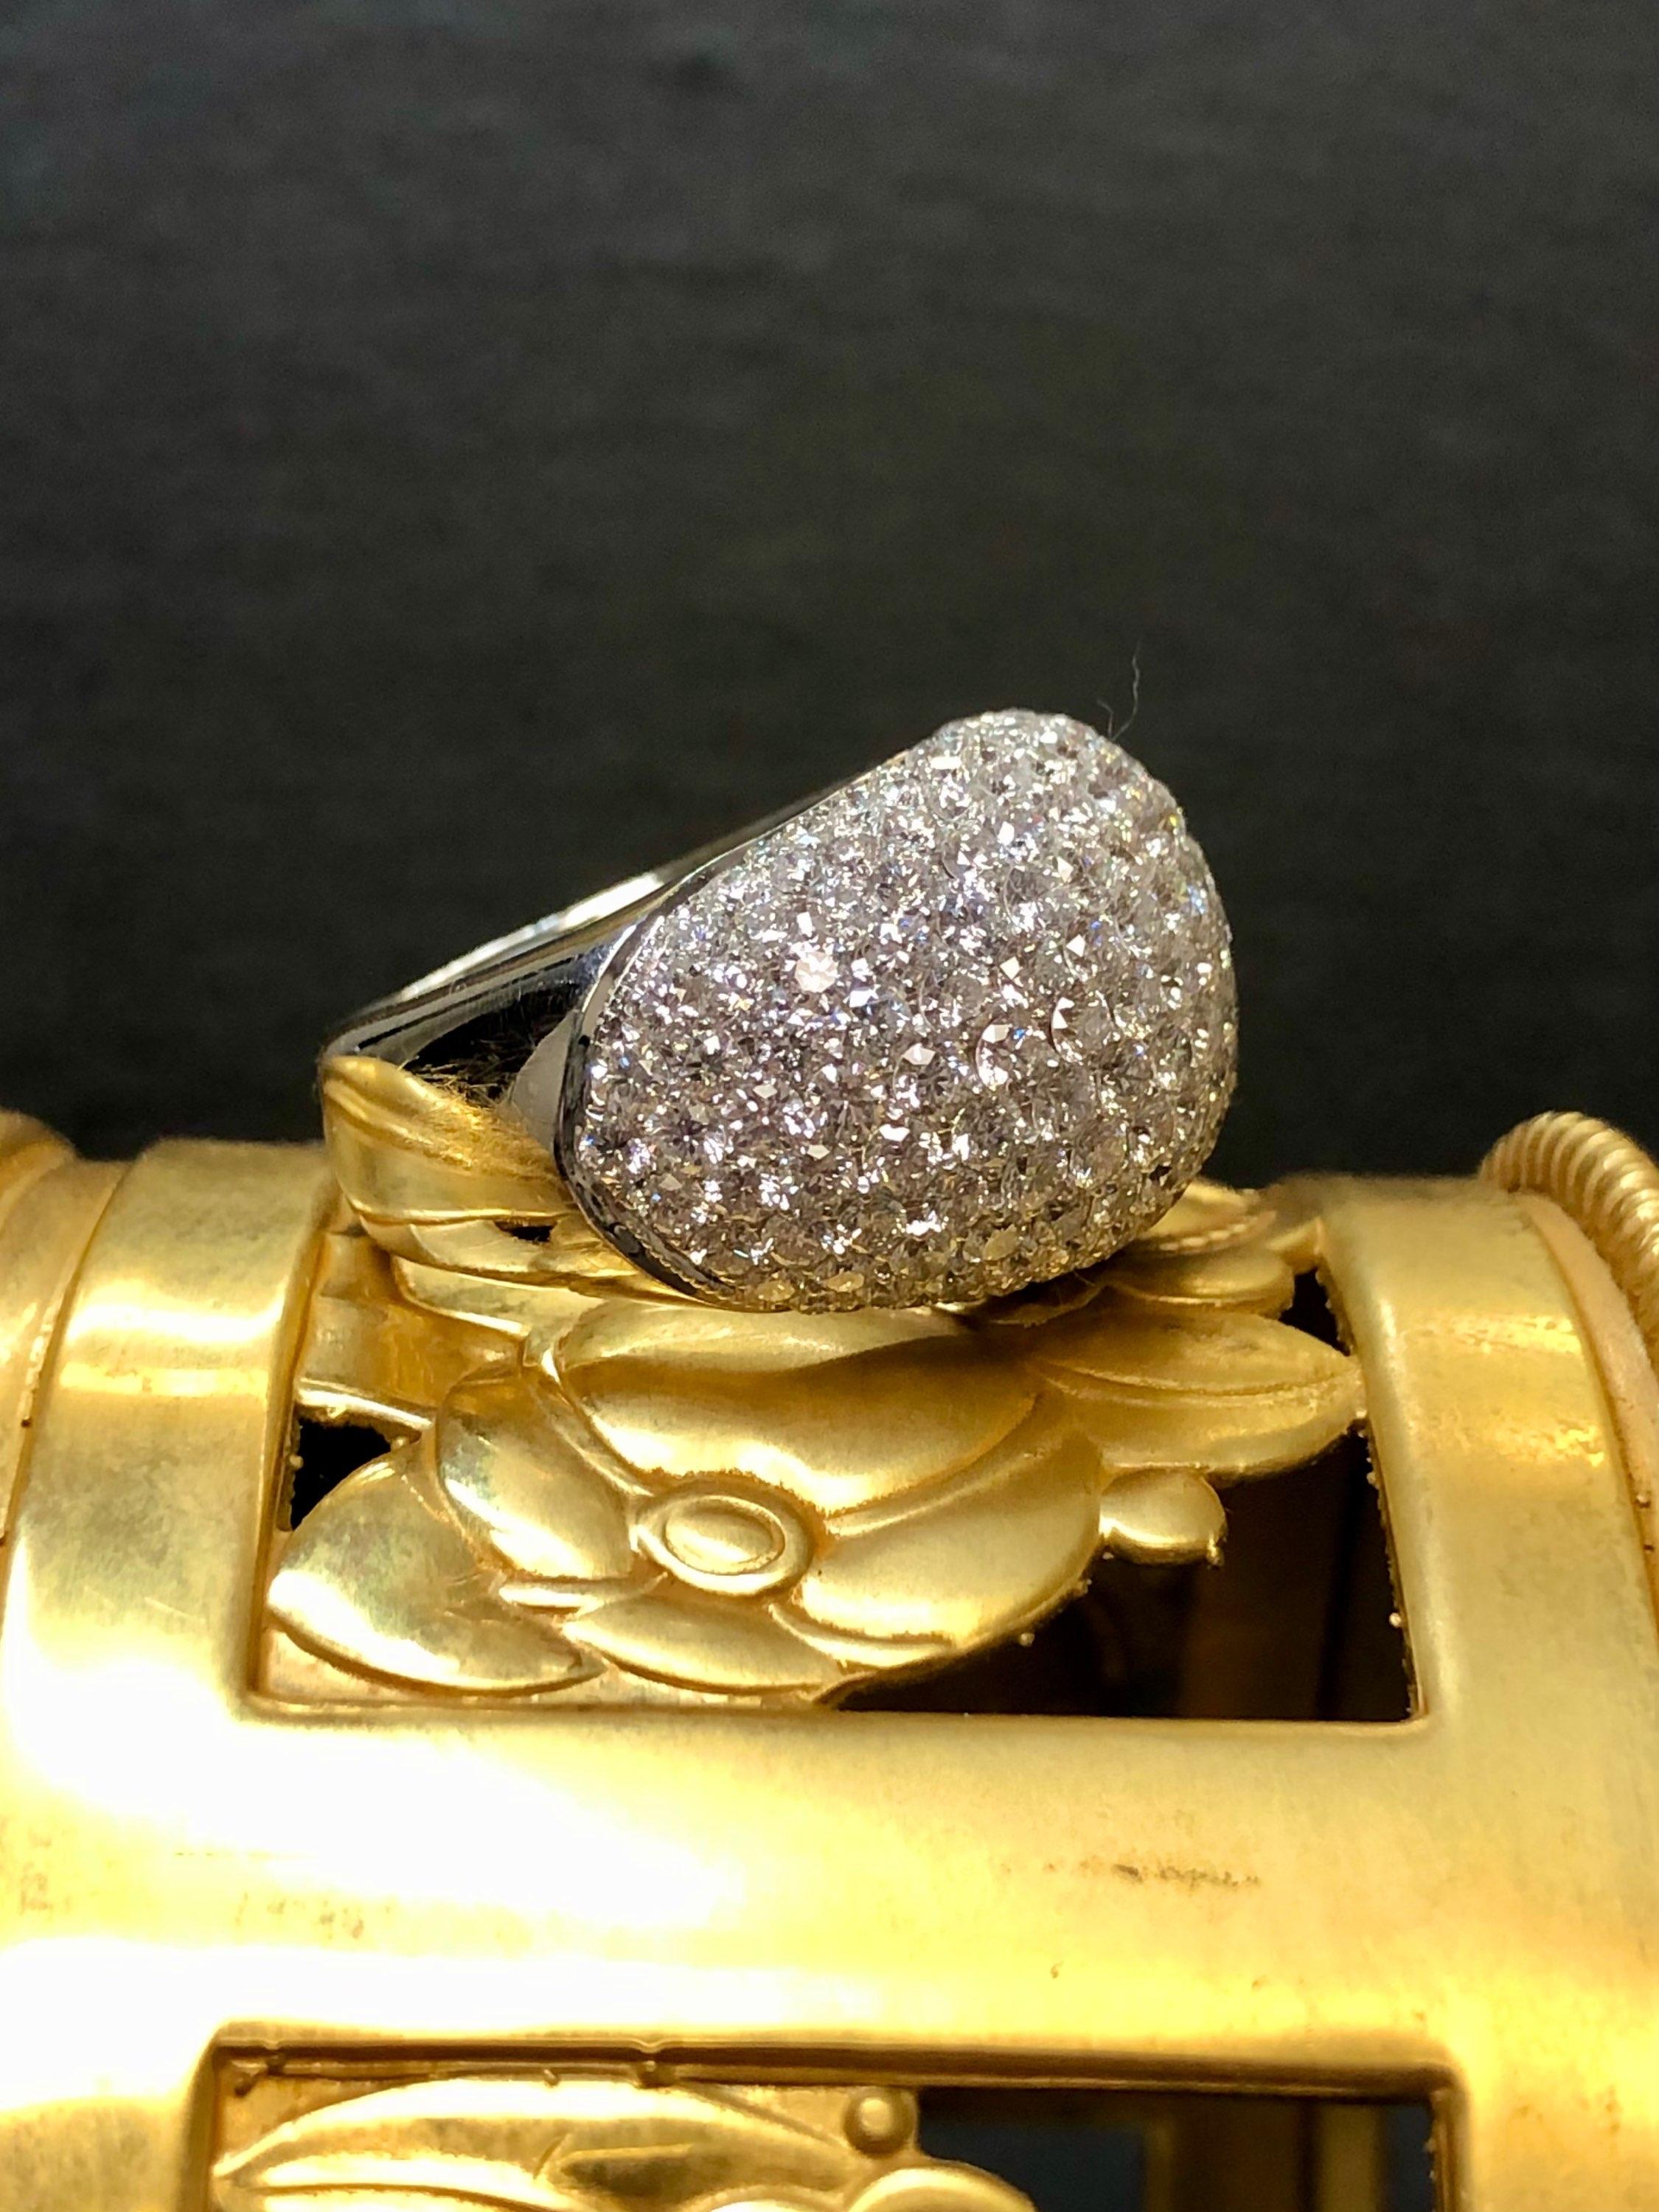 Very well made and expertly set pave diamond dome ring done in 18K white gold set with approximately 6.20cttw in G-H color Vs1-2 clarity round diamonds.

Dimensions/Weight
1” wide and .60” top to bottom. Size 7 1/4 (sizable). Weight is